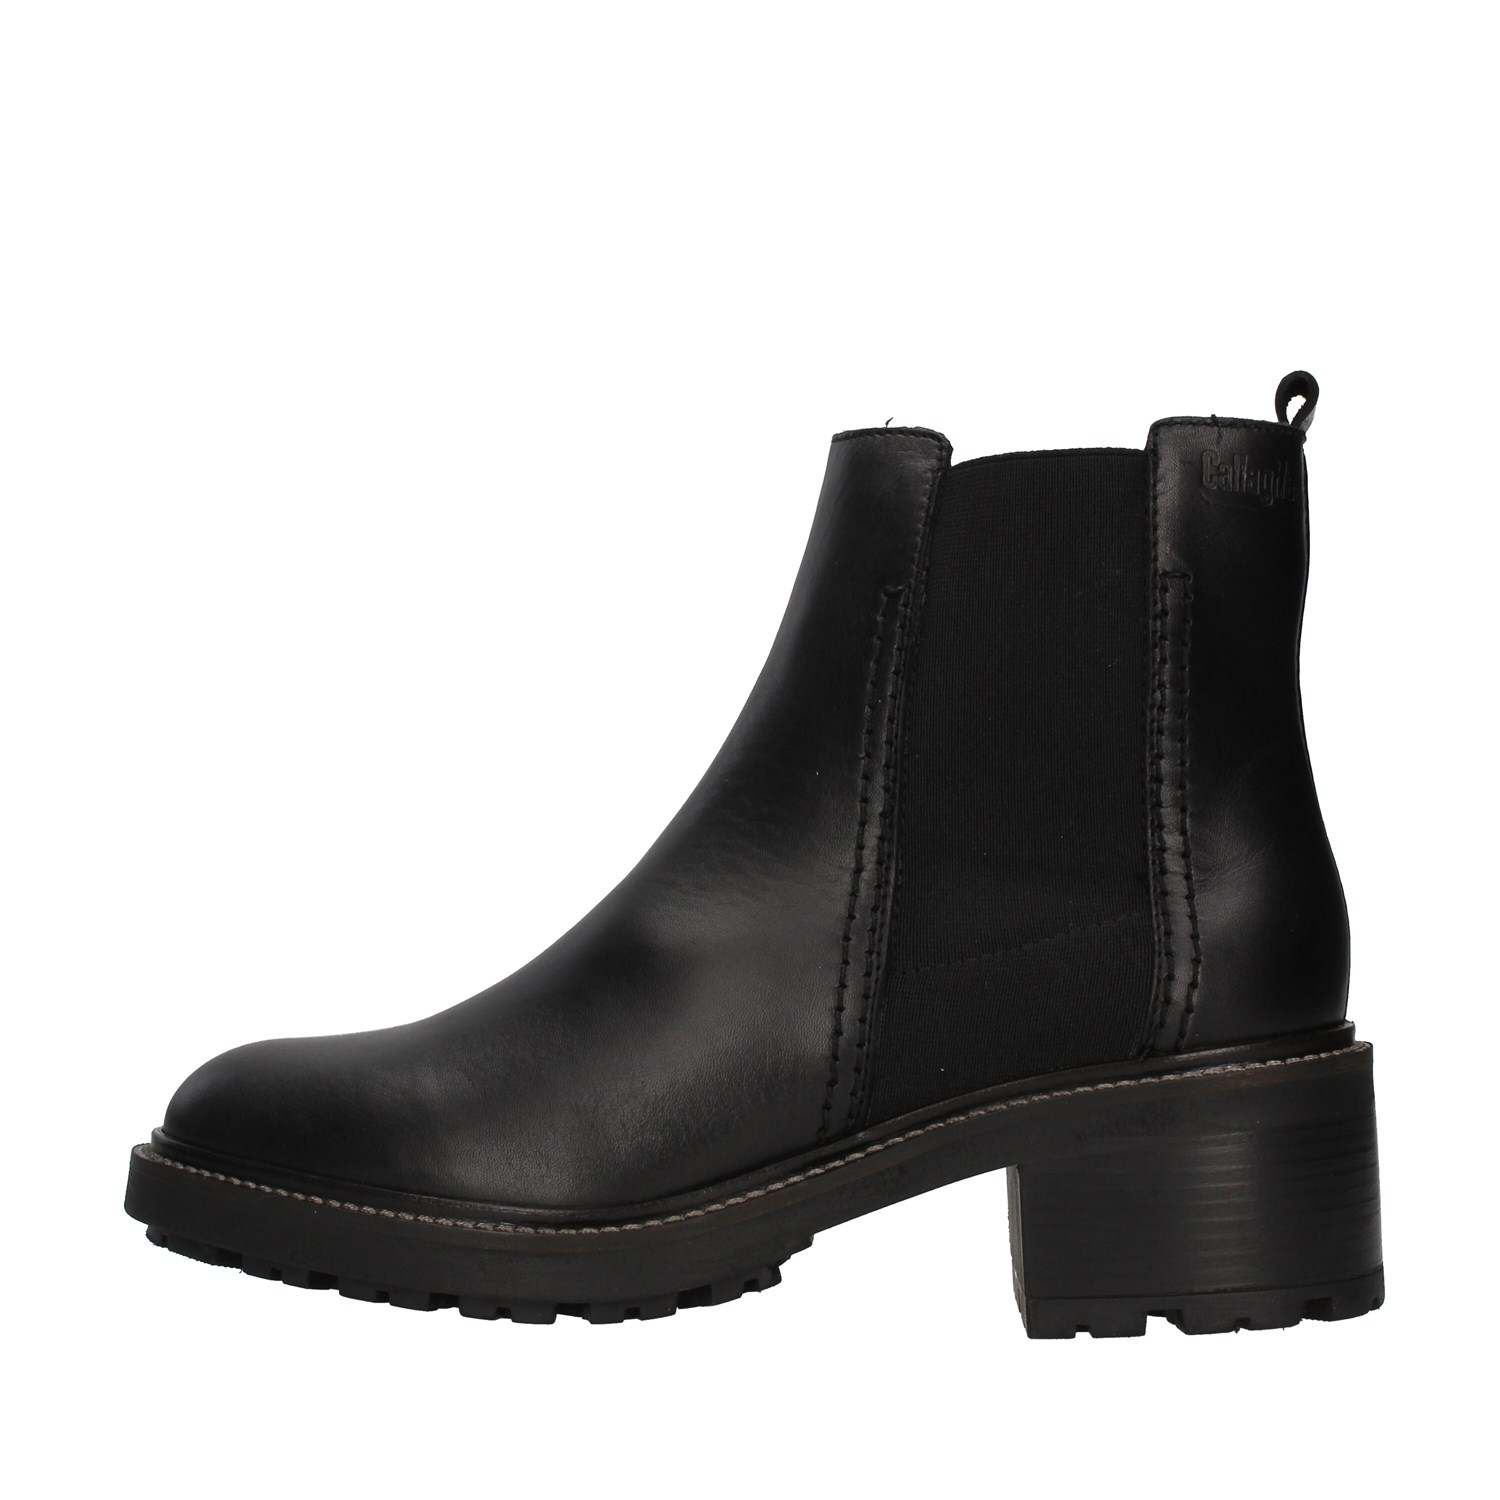 Callaghan Shoes Woman boots BLACK 29609